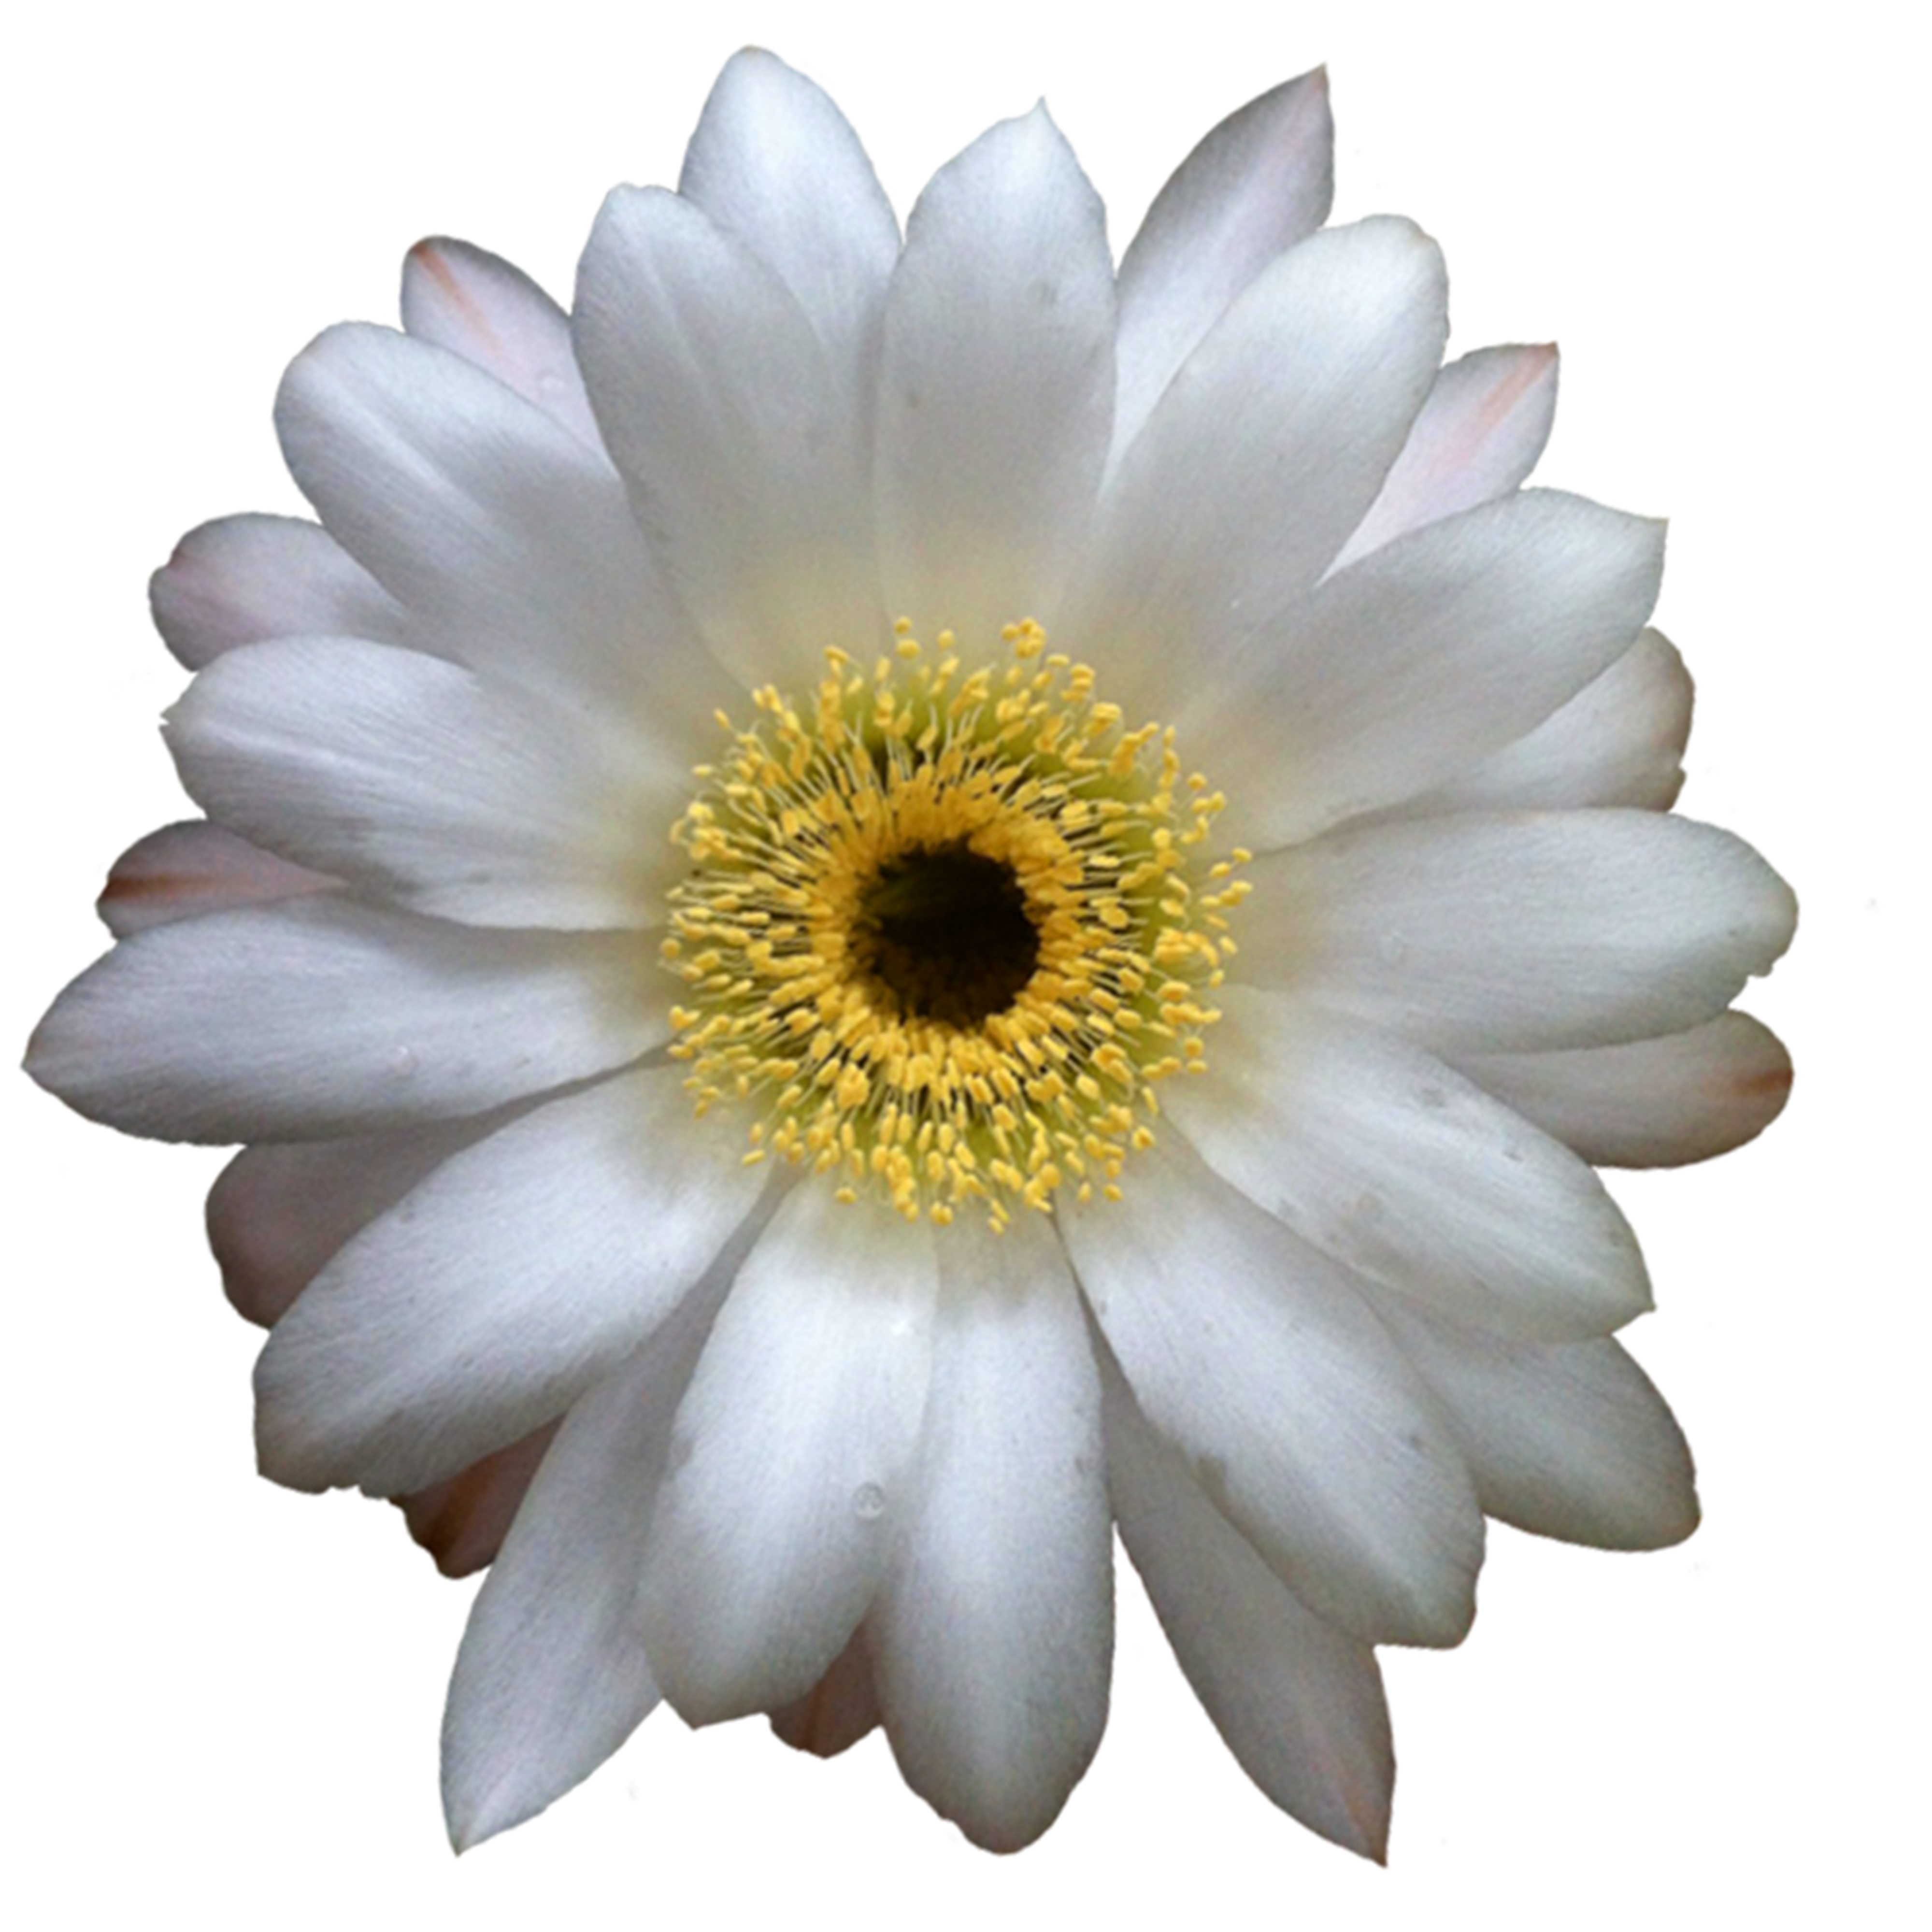 File extracted wikimedia commons. Cactus flower png